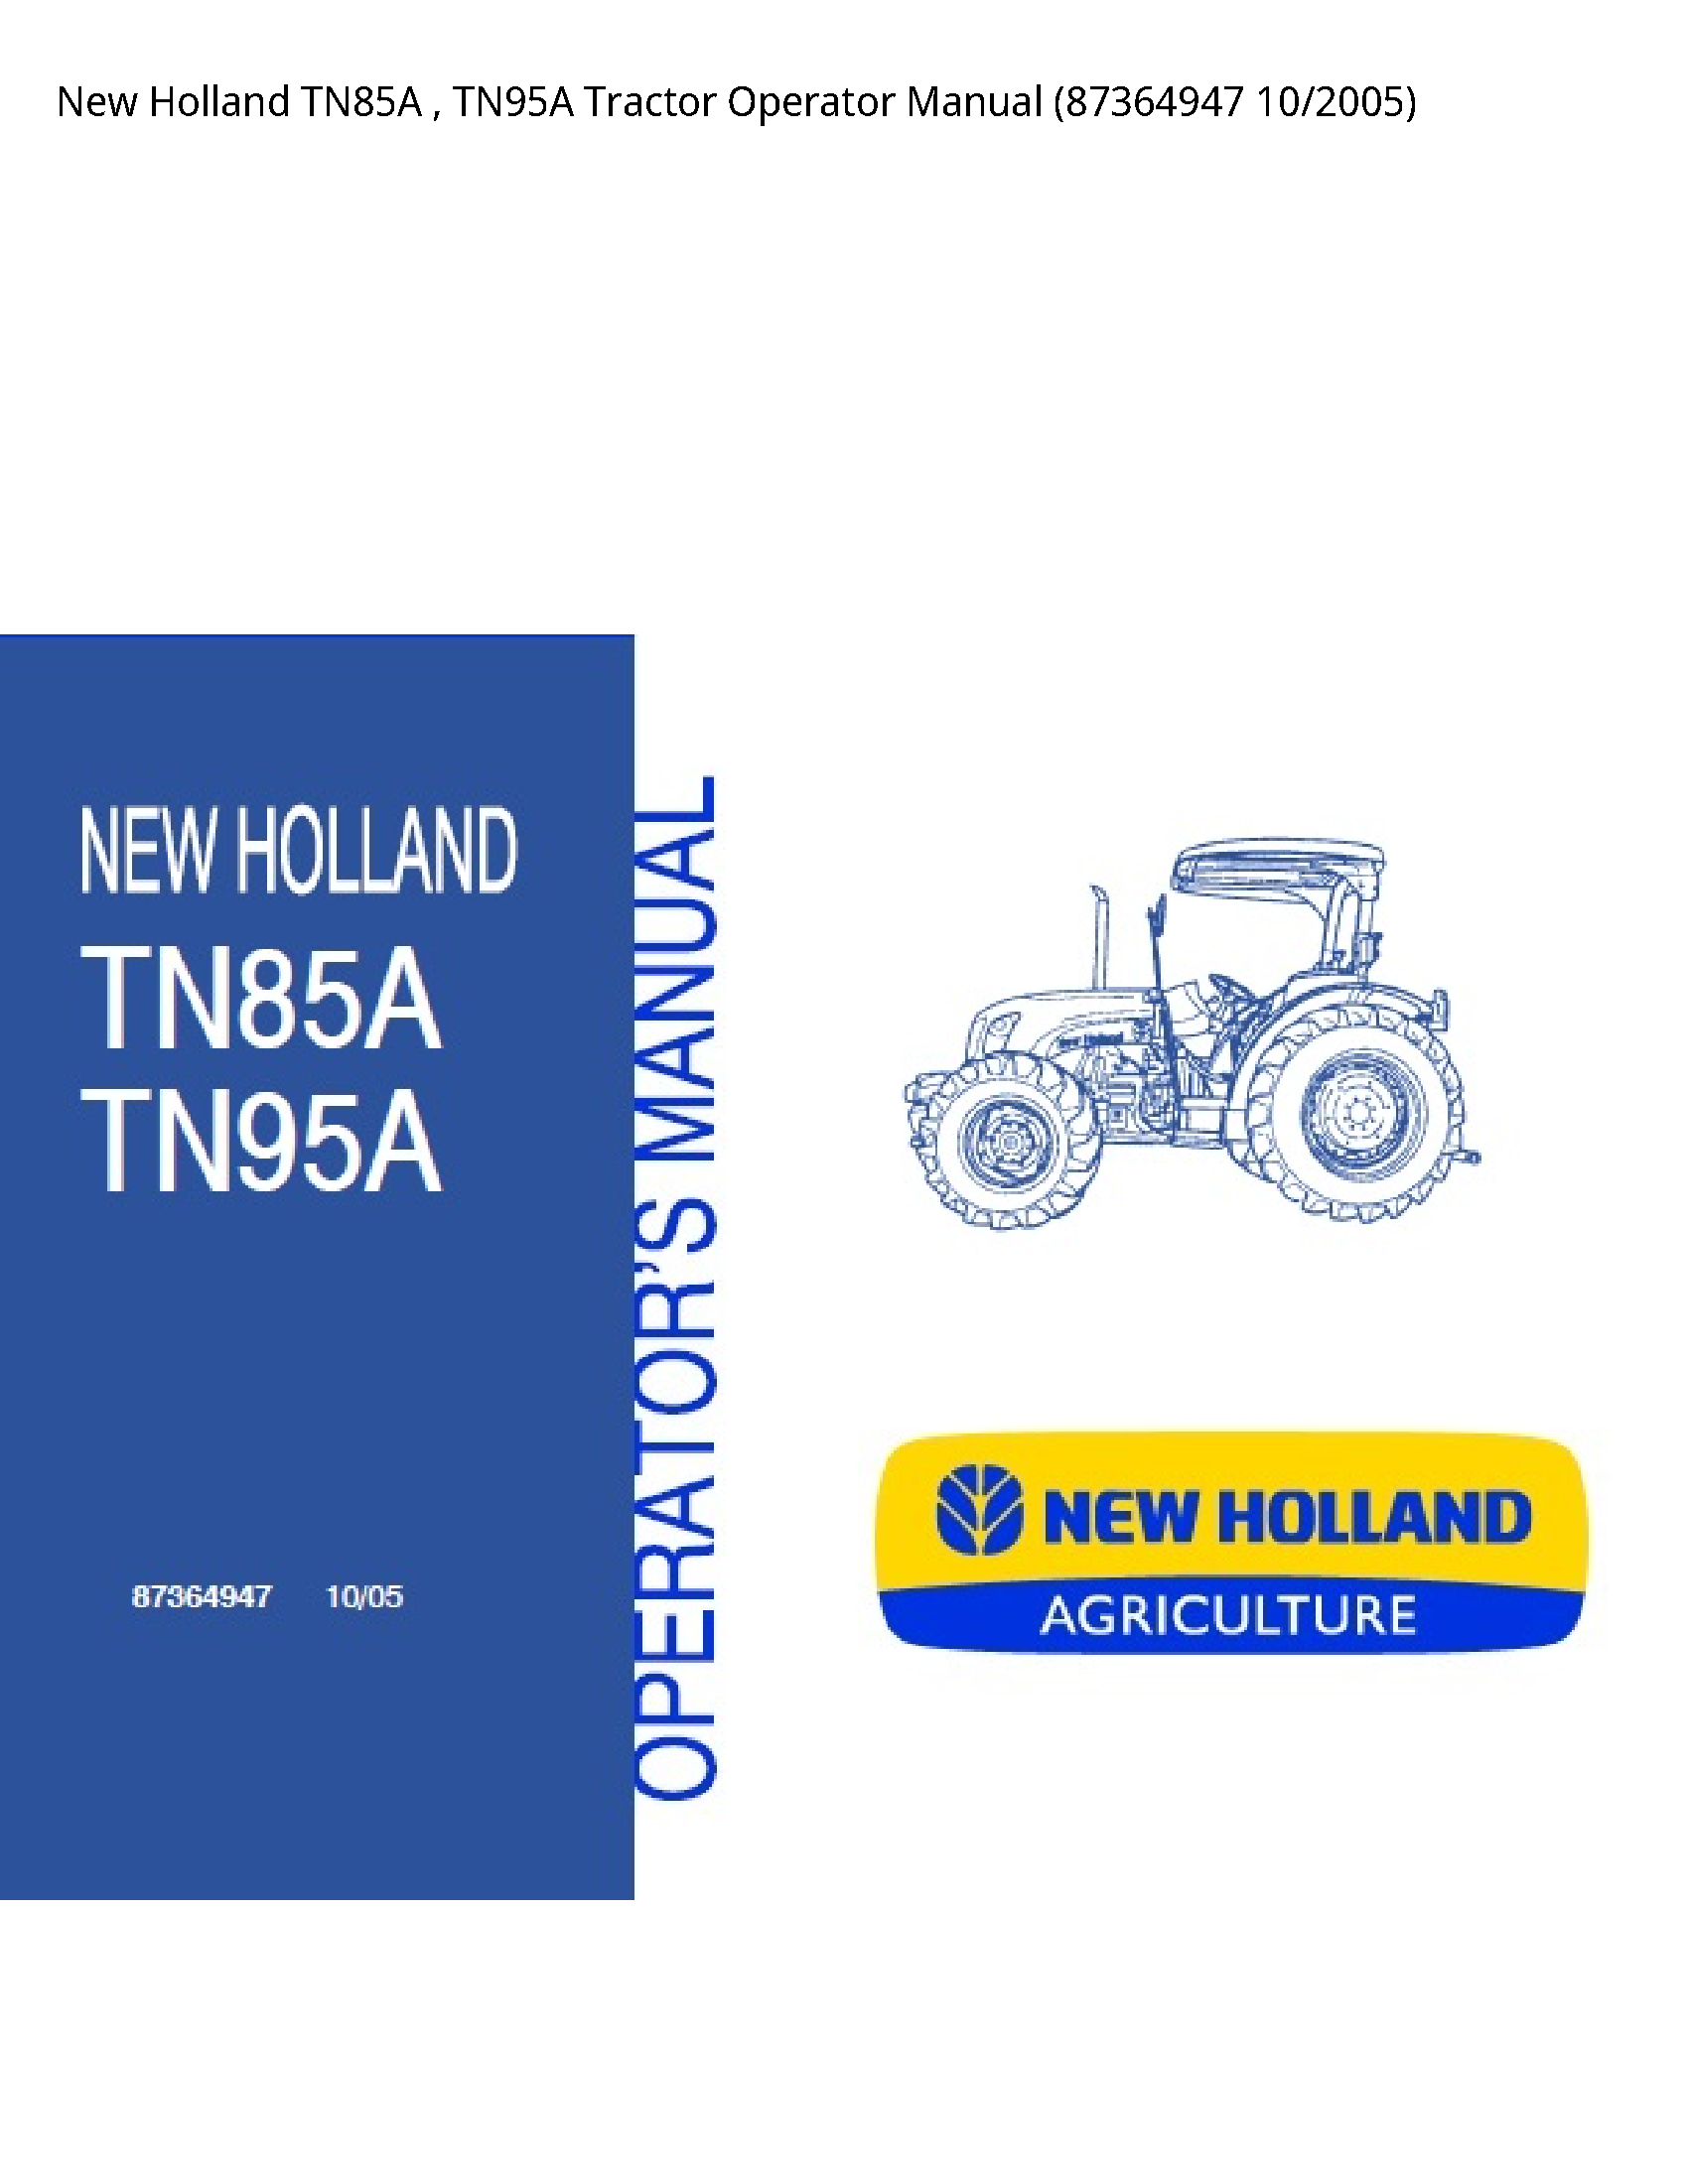 New Holland TN85A Tractor Operator manual